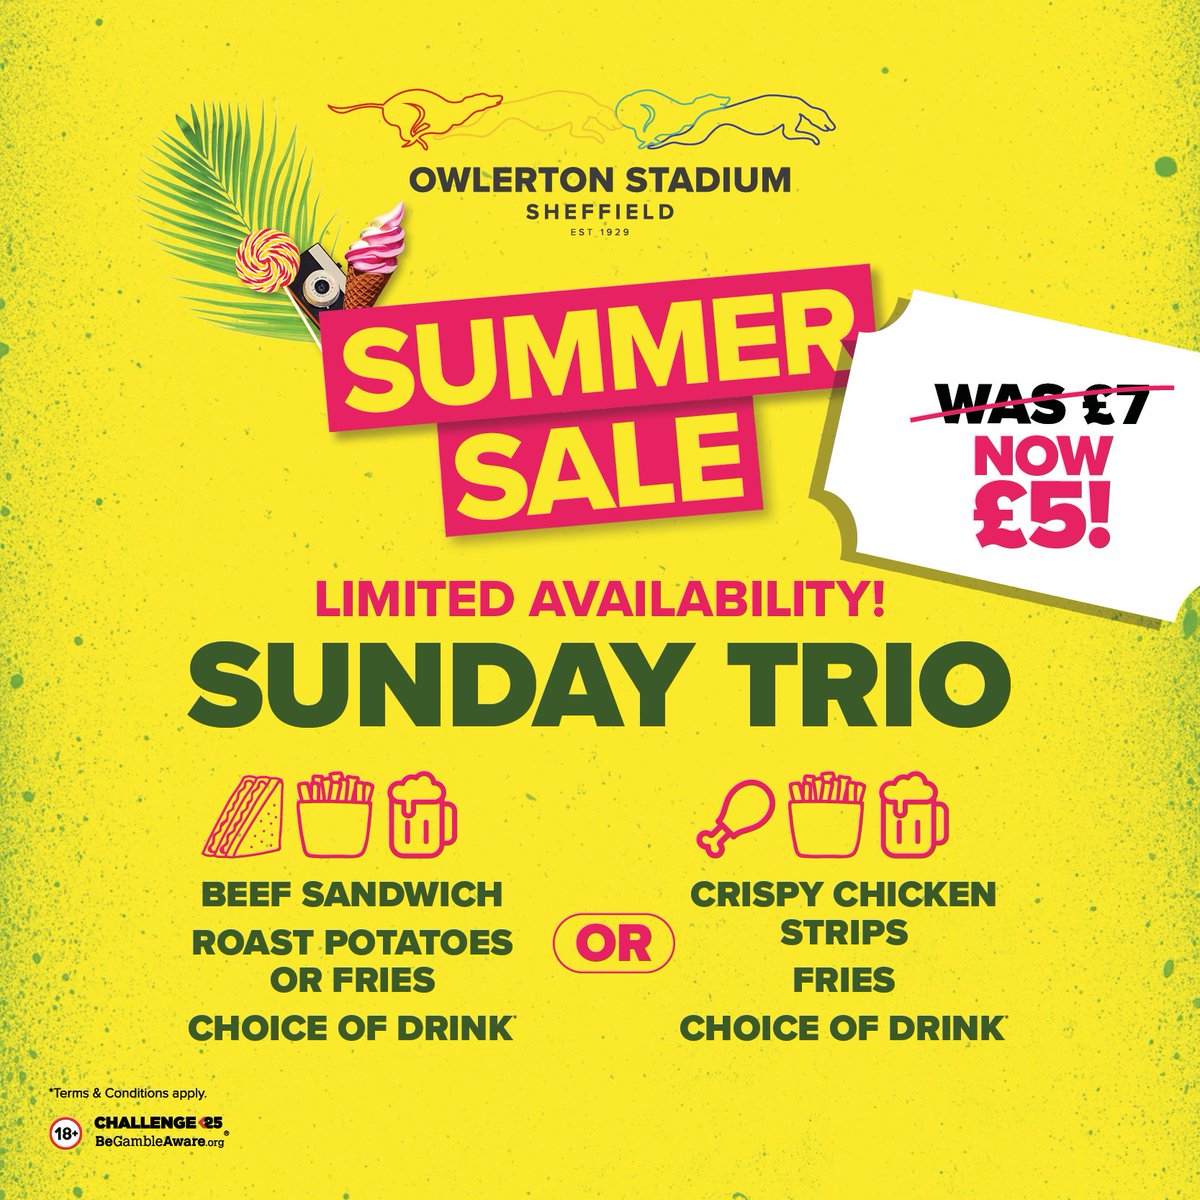 What a bargain 😍 

For a limited time only you can get our unbeatable Sunday Trio package for just a FIVER! 🕺 

Book now before it's too late 👇 
tinyurl.com/ez6eyrep

#owlerton #sheffield #summersale #sheffieldeats #sheffieldfood #foodoffers